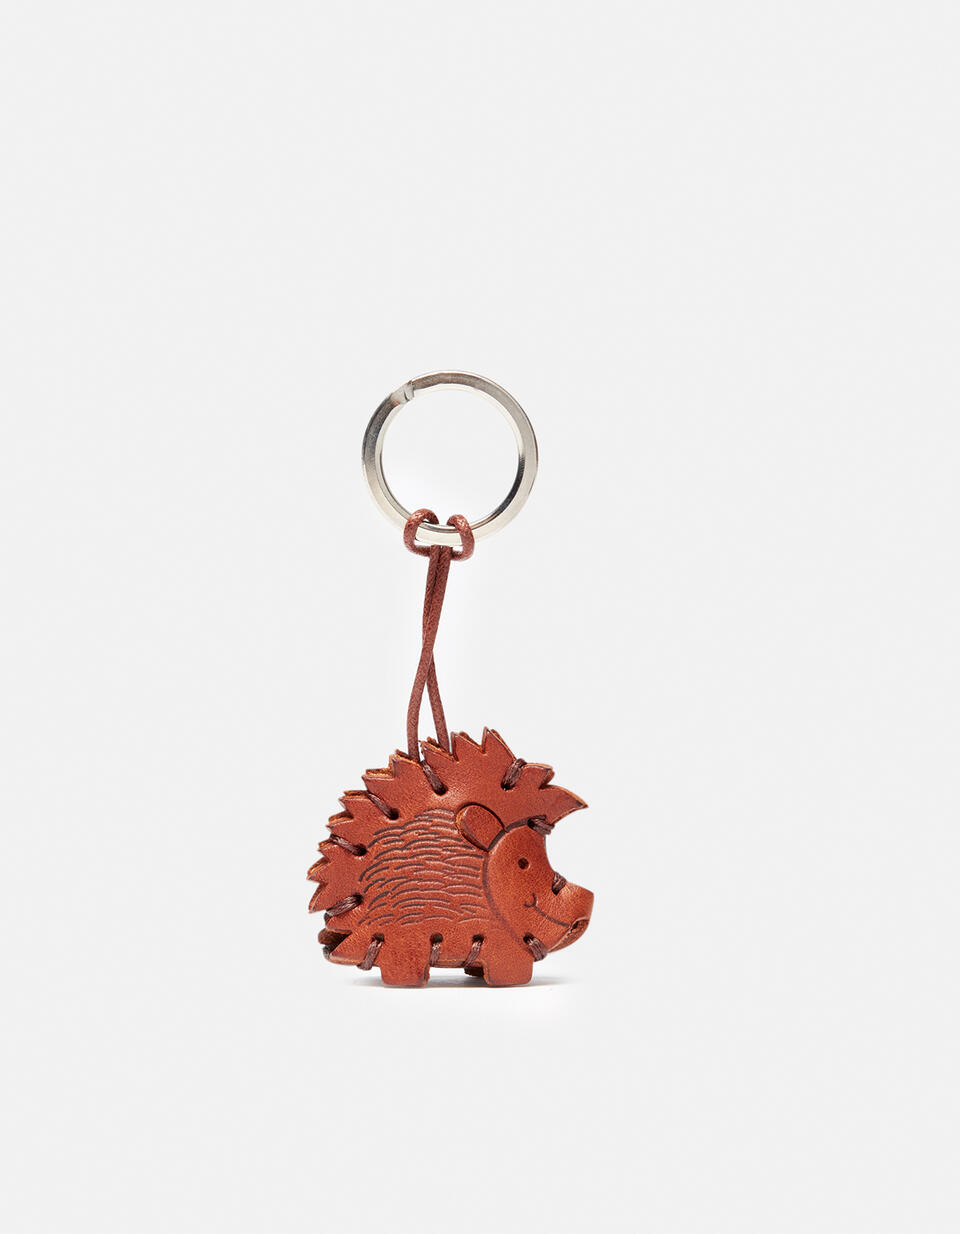 Curly leather keyring - Key holders - Women's Accessories | Accessories MARRONE - Key holders - Women's Accessories | AccessoriesCuoieria Fiorentina